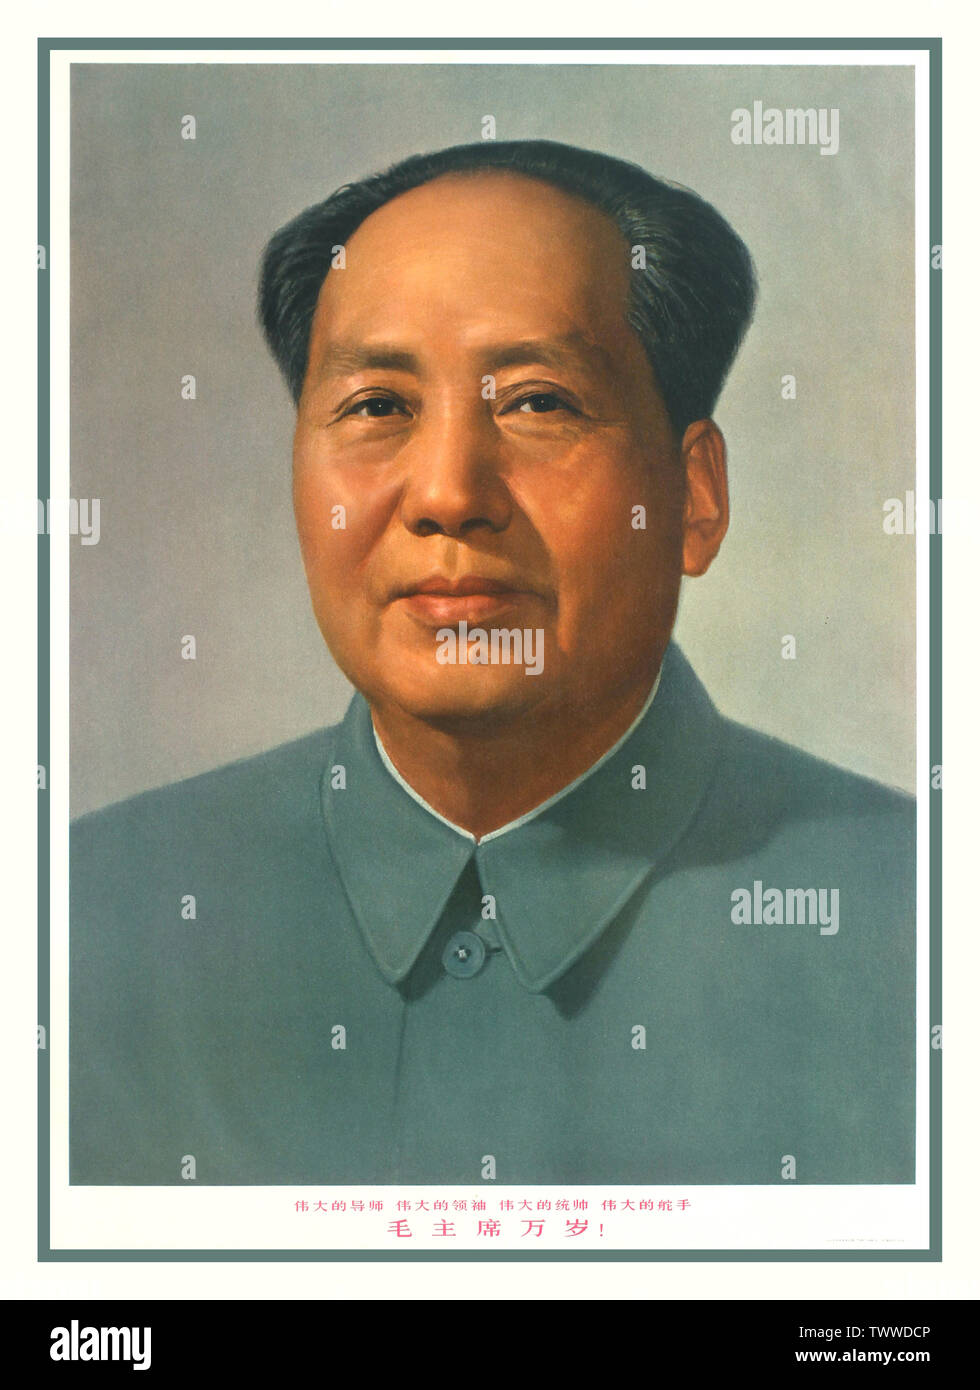 Chairman Mao Chinese Propaganda poster published in 1969 featuring an official portrait of Mao Zedong, Great Mentor, Great Leader, Great Commander, Great Statesman.  China, 1967,  Mao Zedong (December 26, 1893 – September 9, 1976), also known as Chairman Mao, was a Chinese communist revolutionary who became the founding father of the People's Republic of China, which he ruled as the Chairman of the Communist Party of China from its establishment in 1949 until his death in 1976. His theories, military strategies, and political policies are collectively known as Maoism. Stock Photo